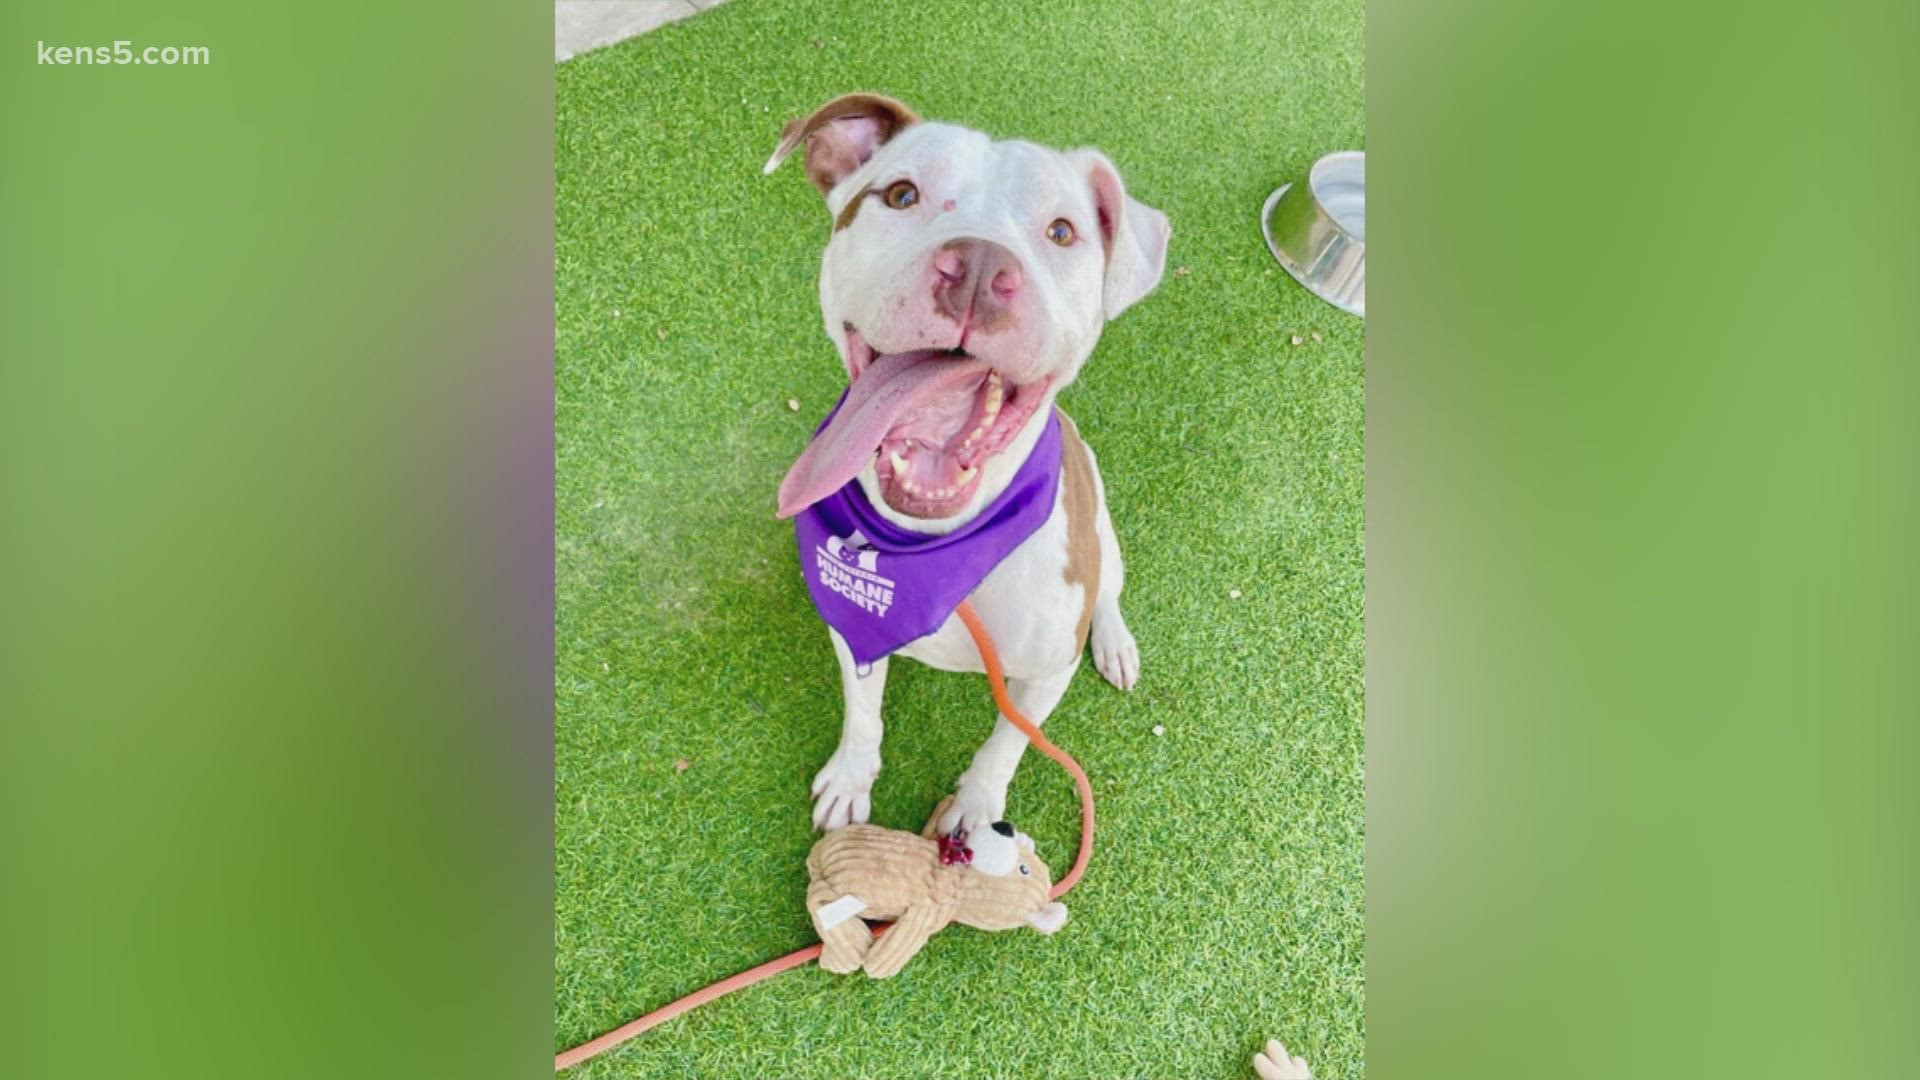 Monster is a 5-year-old dog. He gets along with other dogs and would make a great family pet. He loves to play fetch and likes his chew toys, too.